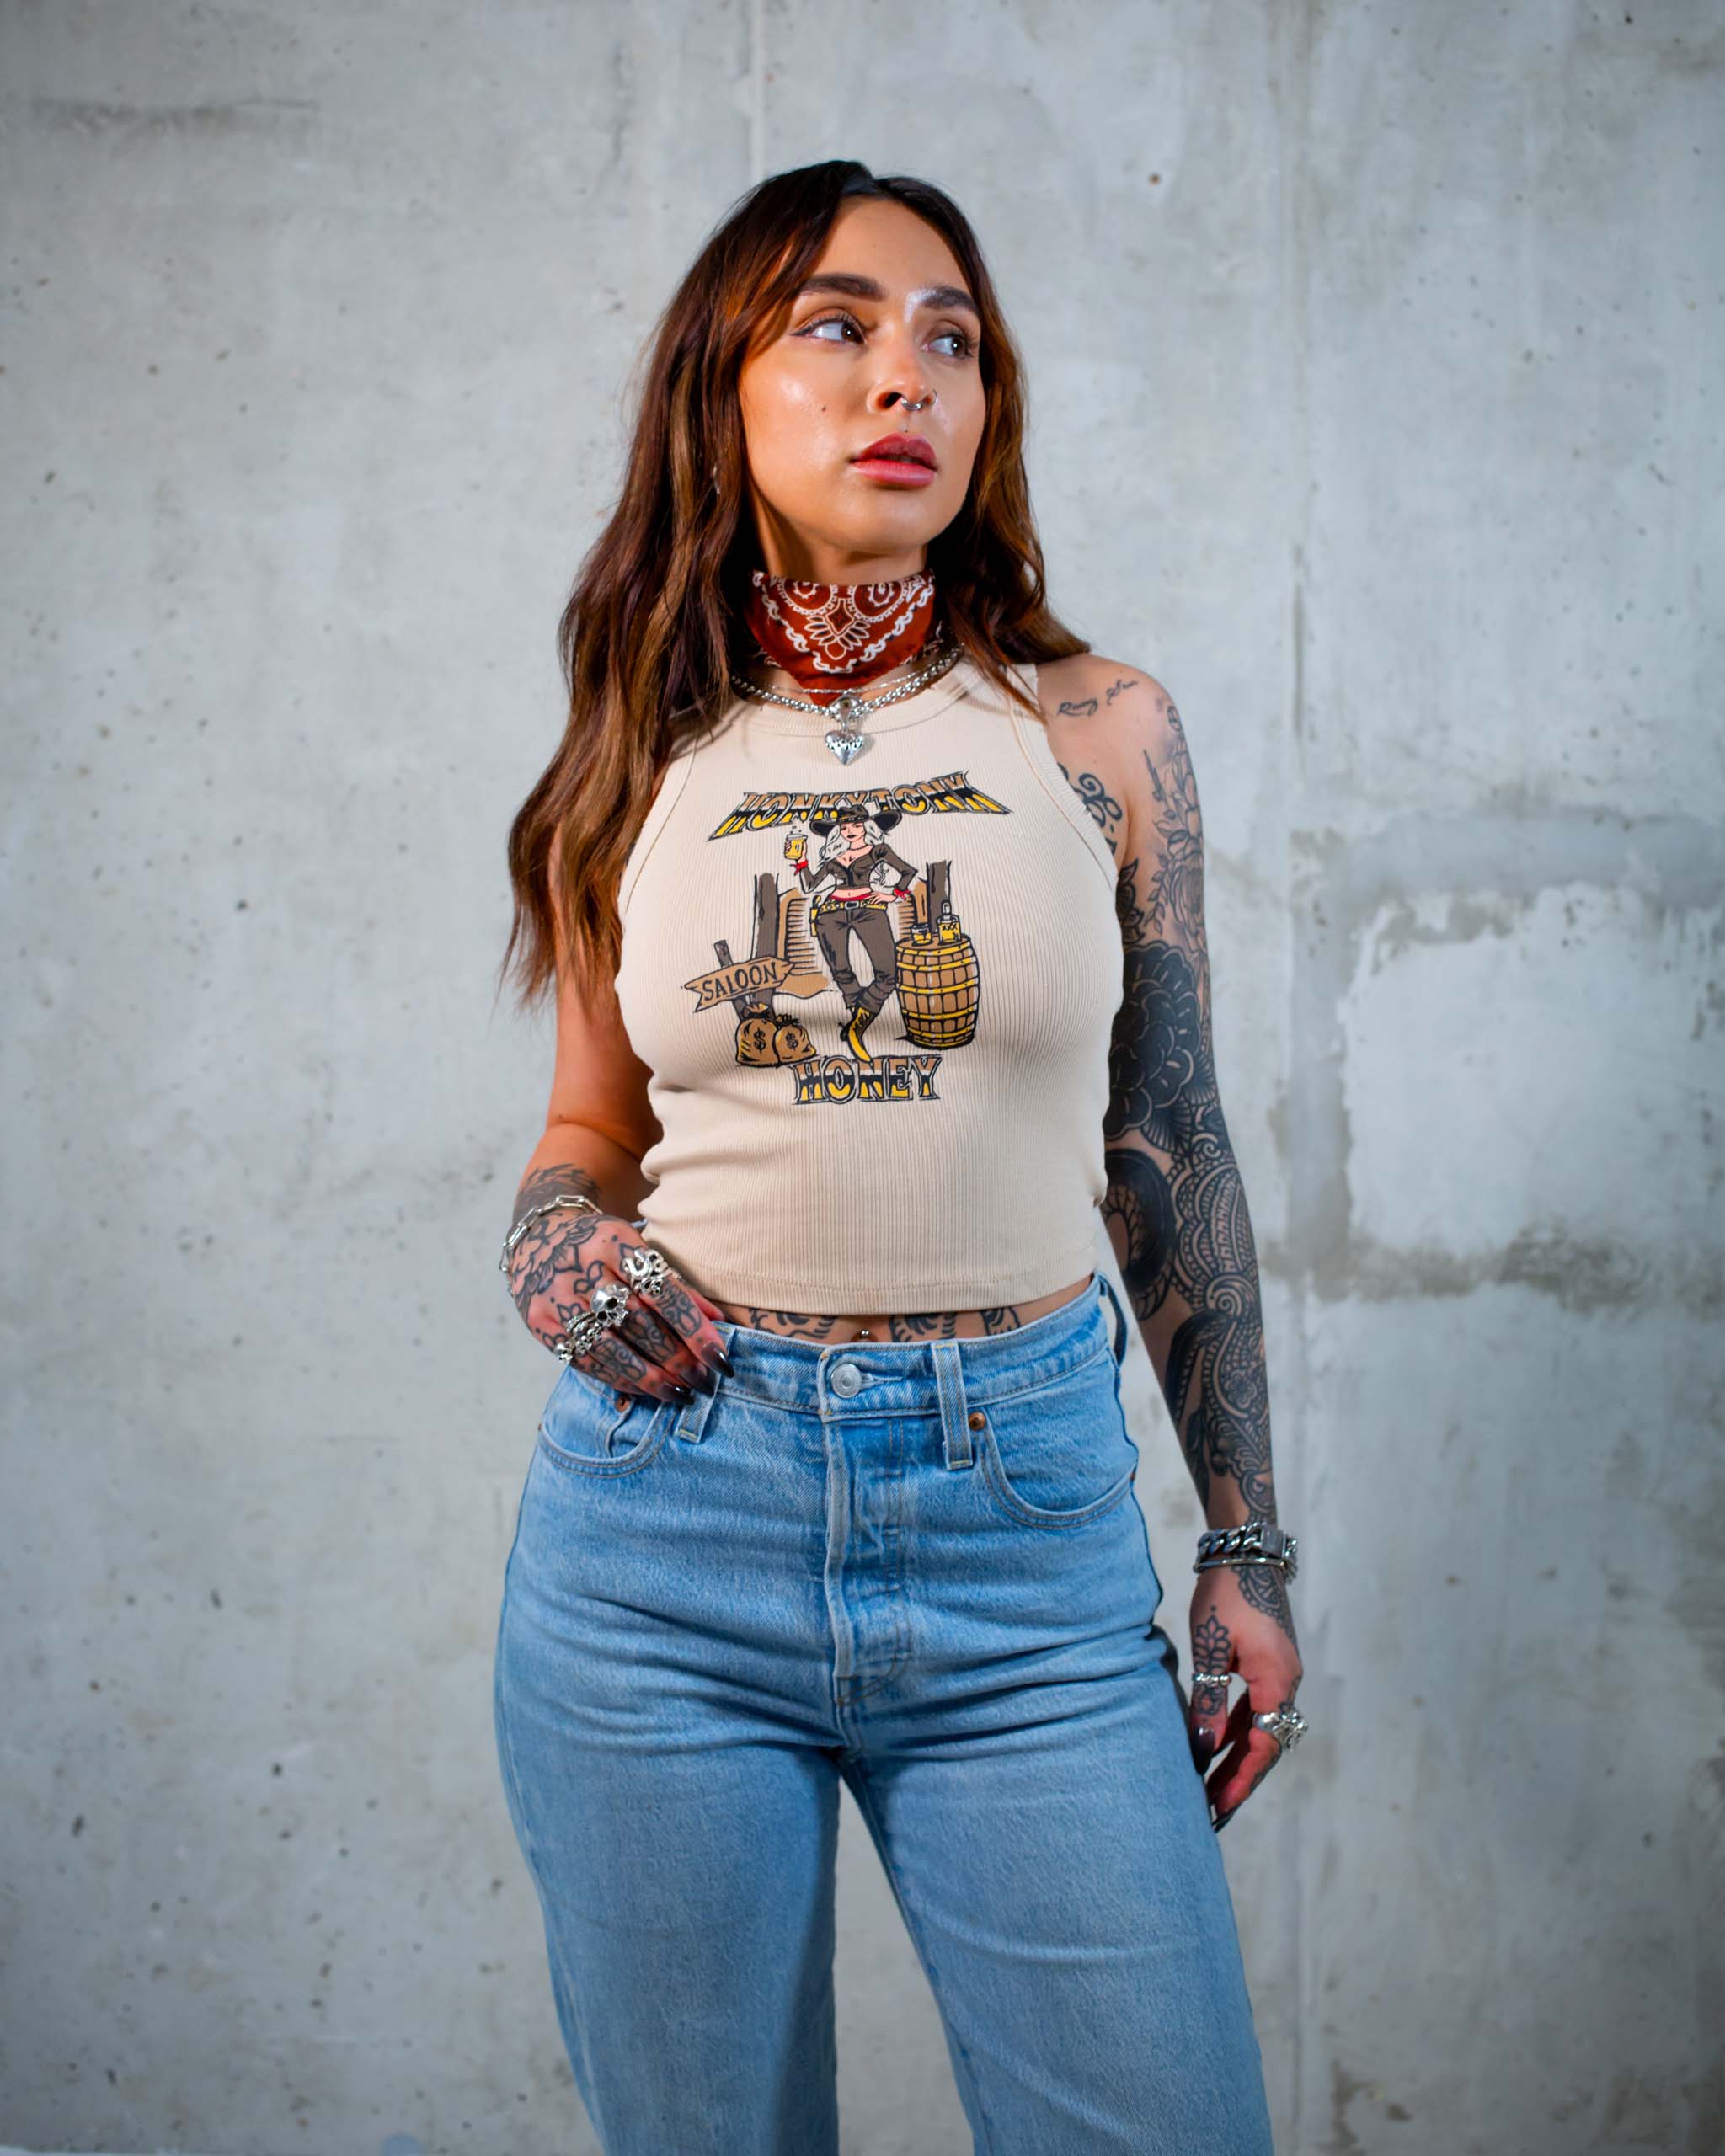 The Honkytonk Honey tank top by Sleazy Rider, featuring a cowgirl outside a wild west saloon.